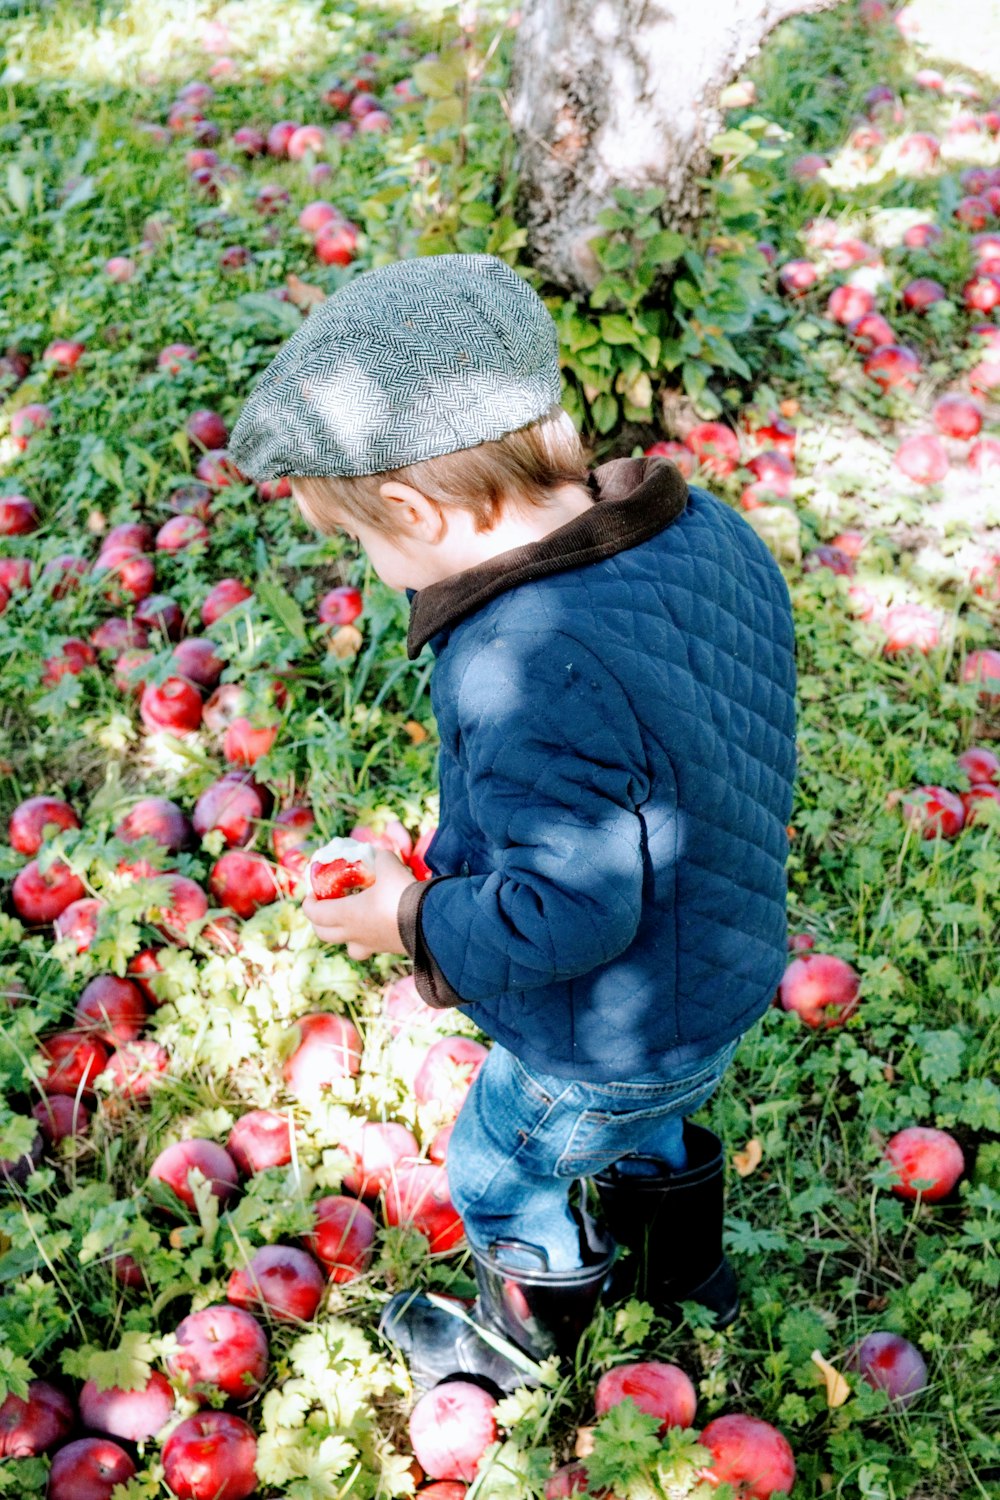 a baby picking red apples